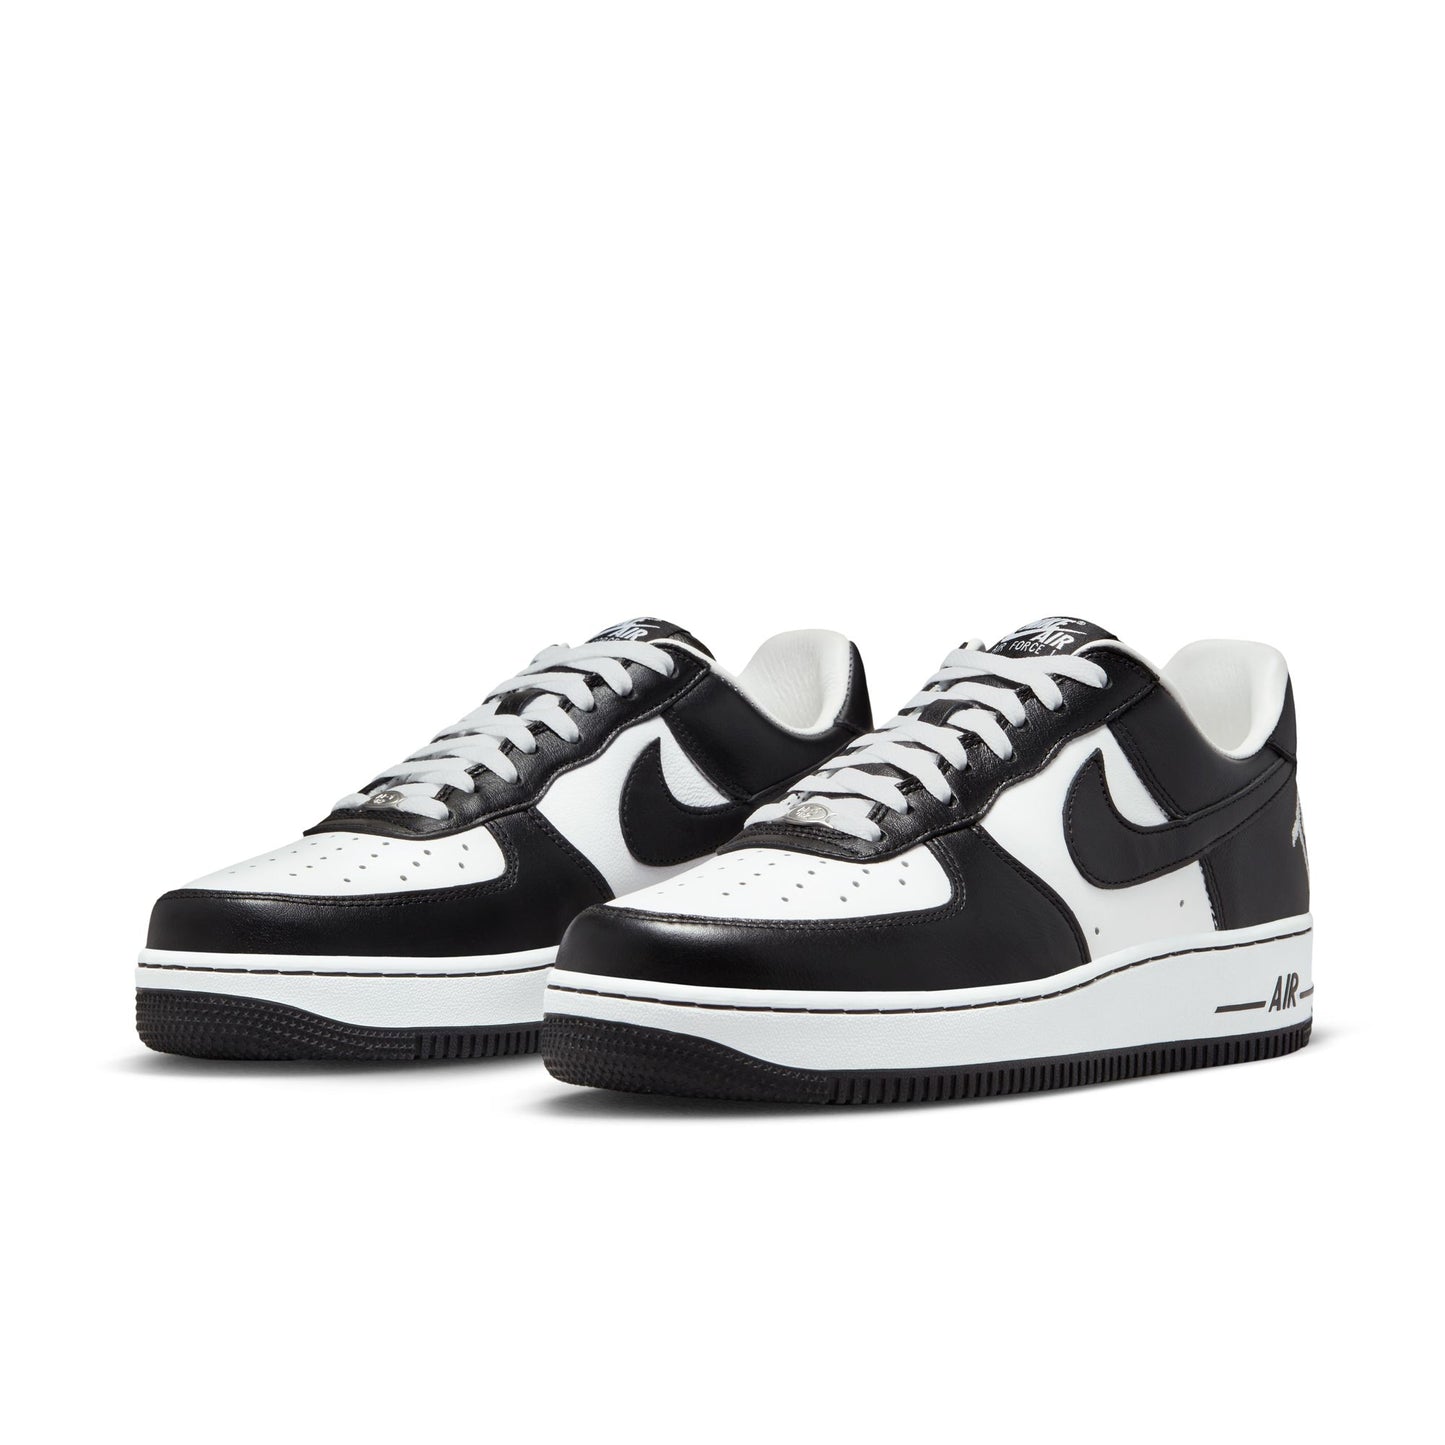 AIR FORCE 1 LOW QS TS – Laced.